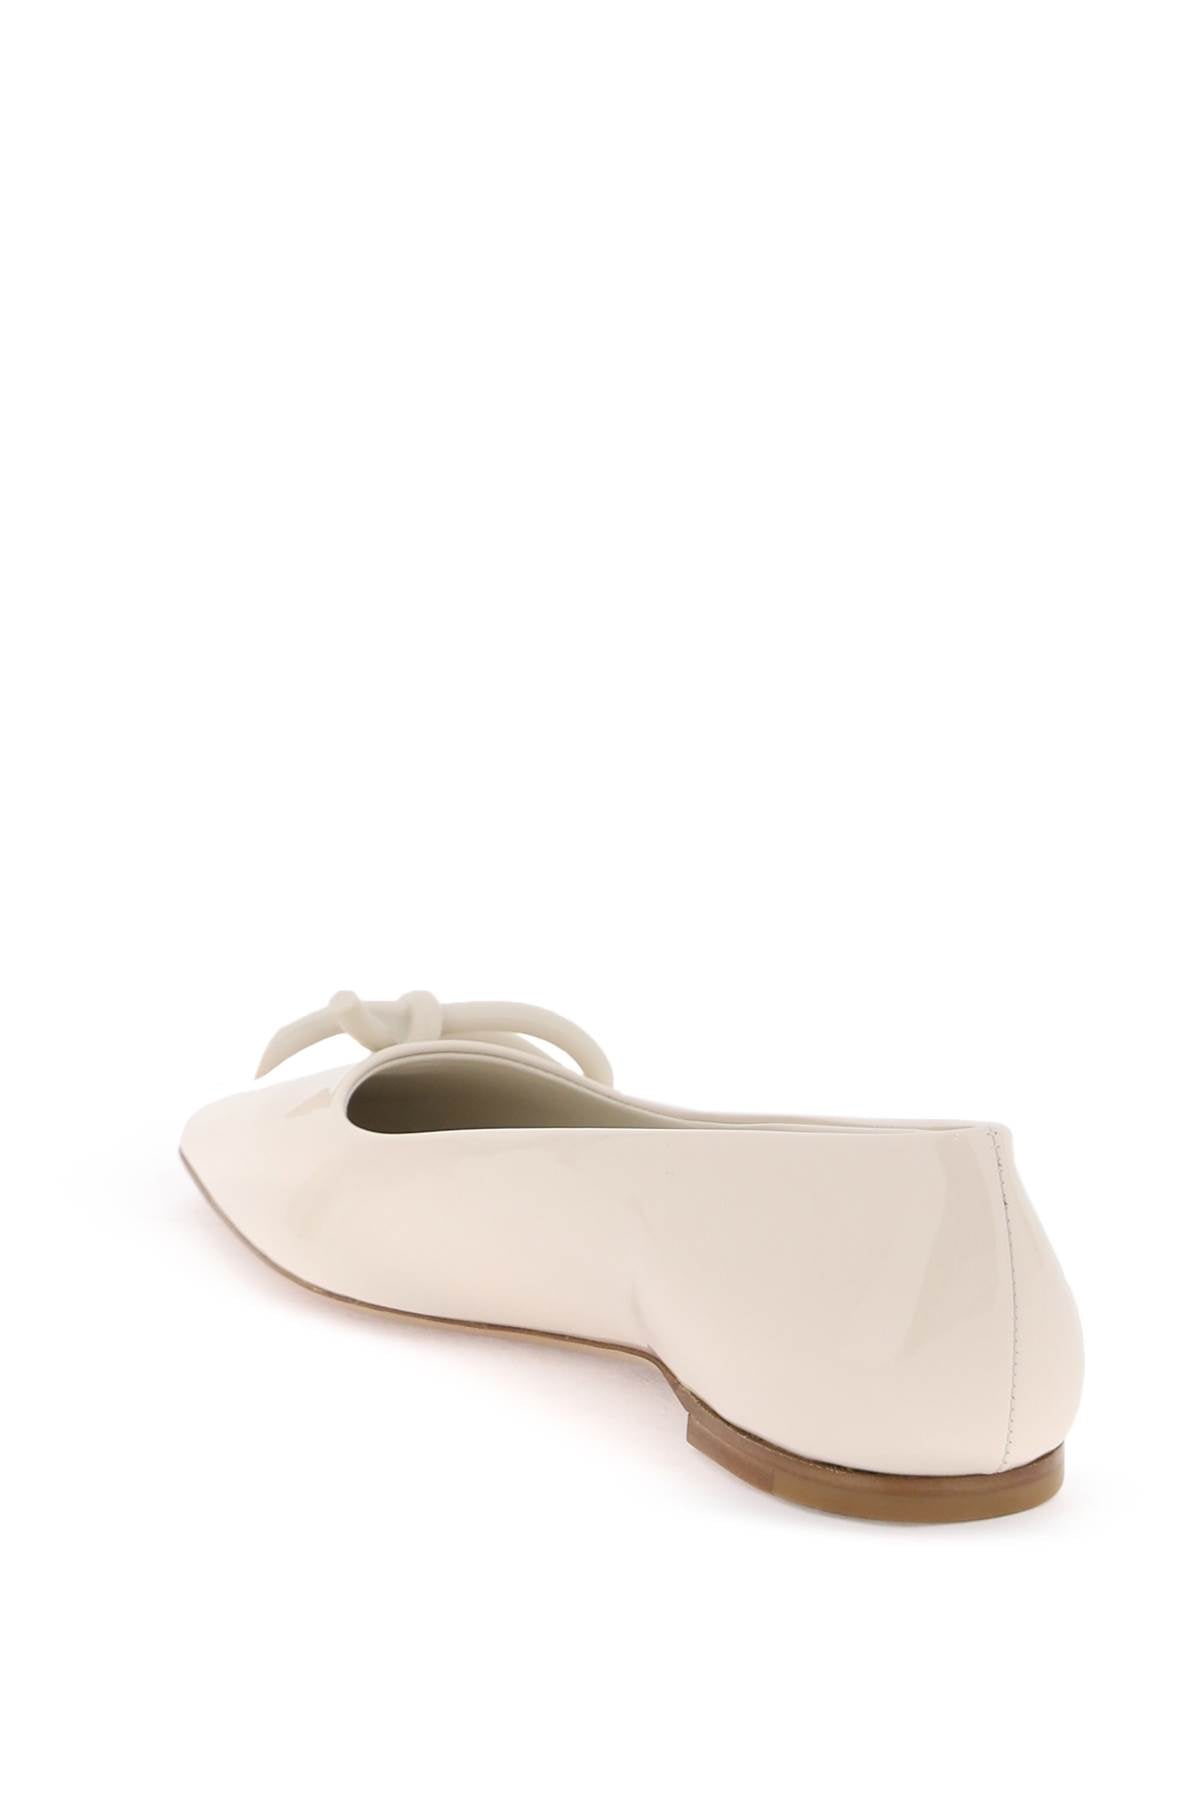 FERRAGAMO White Patent Leather Ballet Flats with Asymmetrical Bow for Women